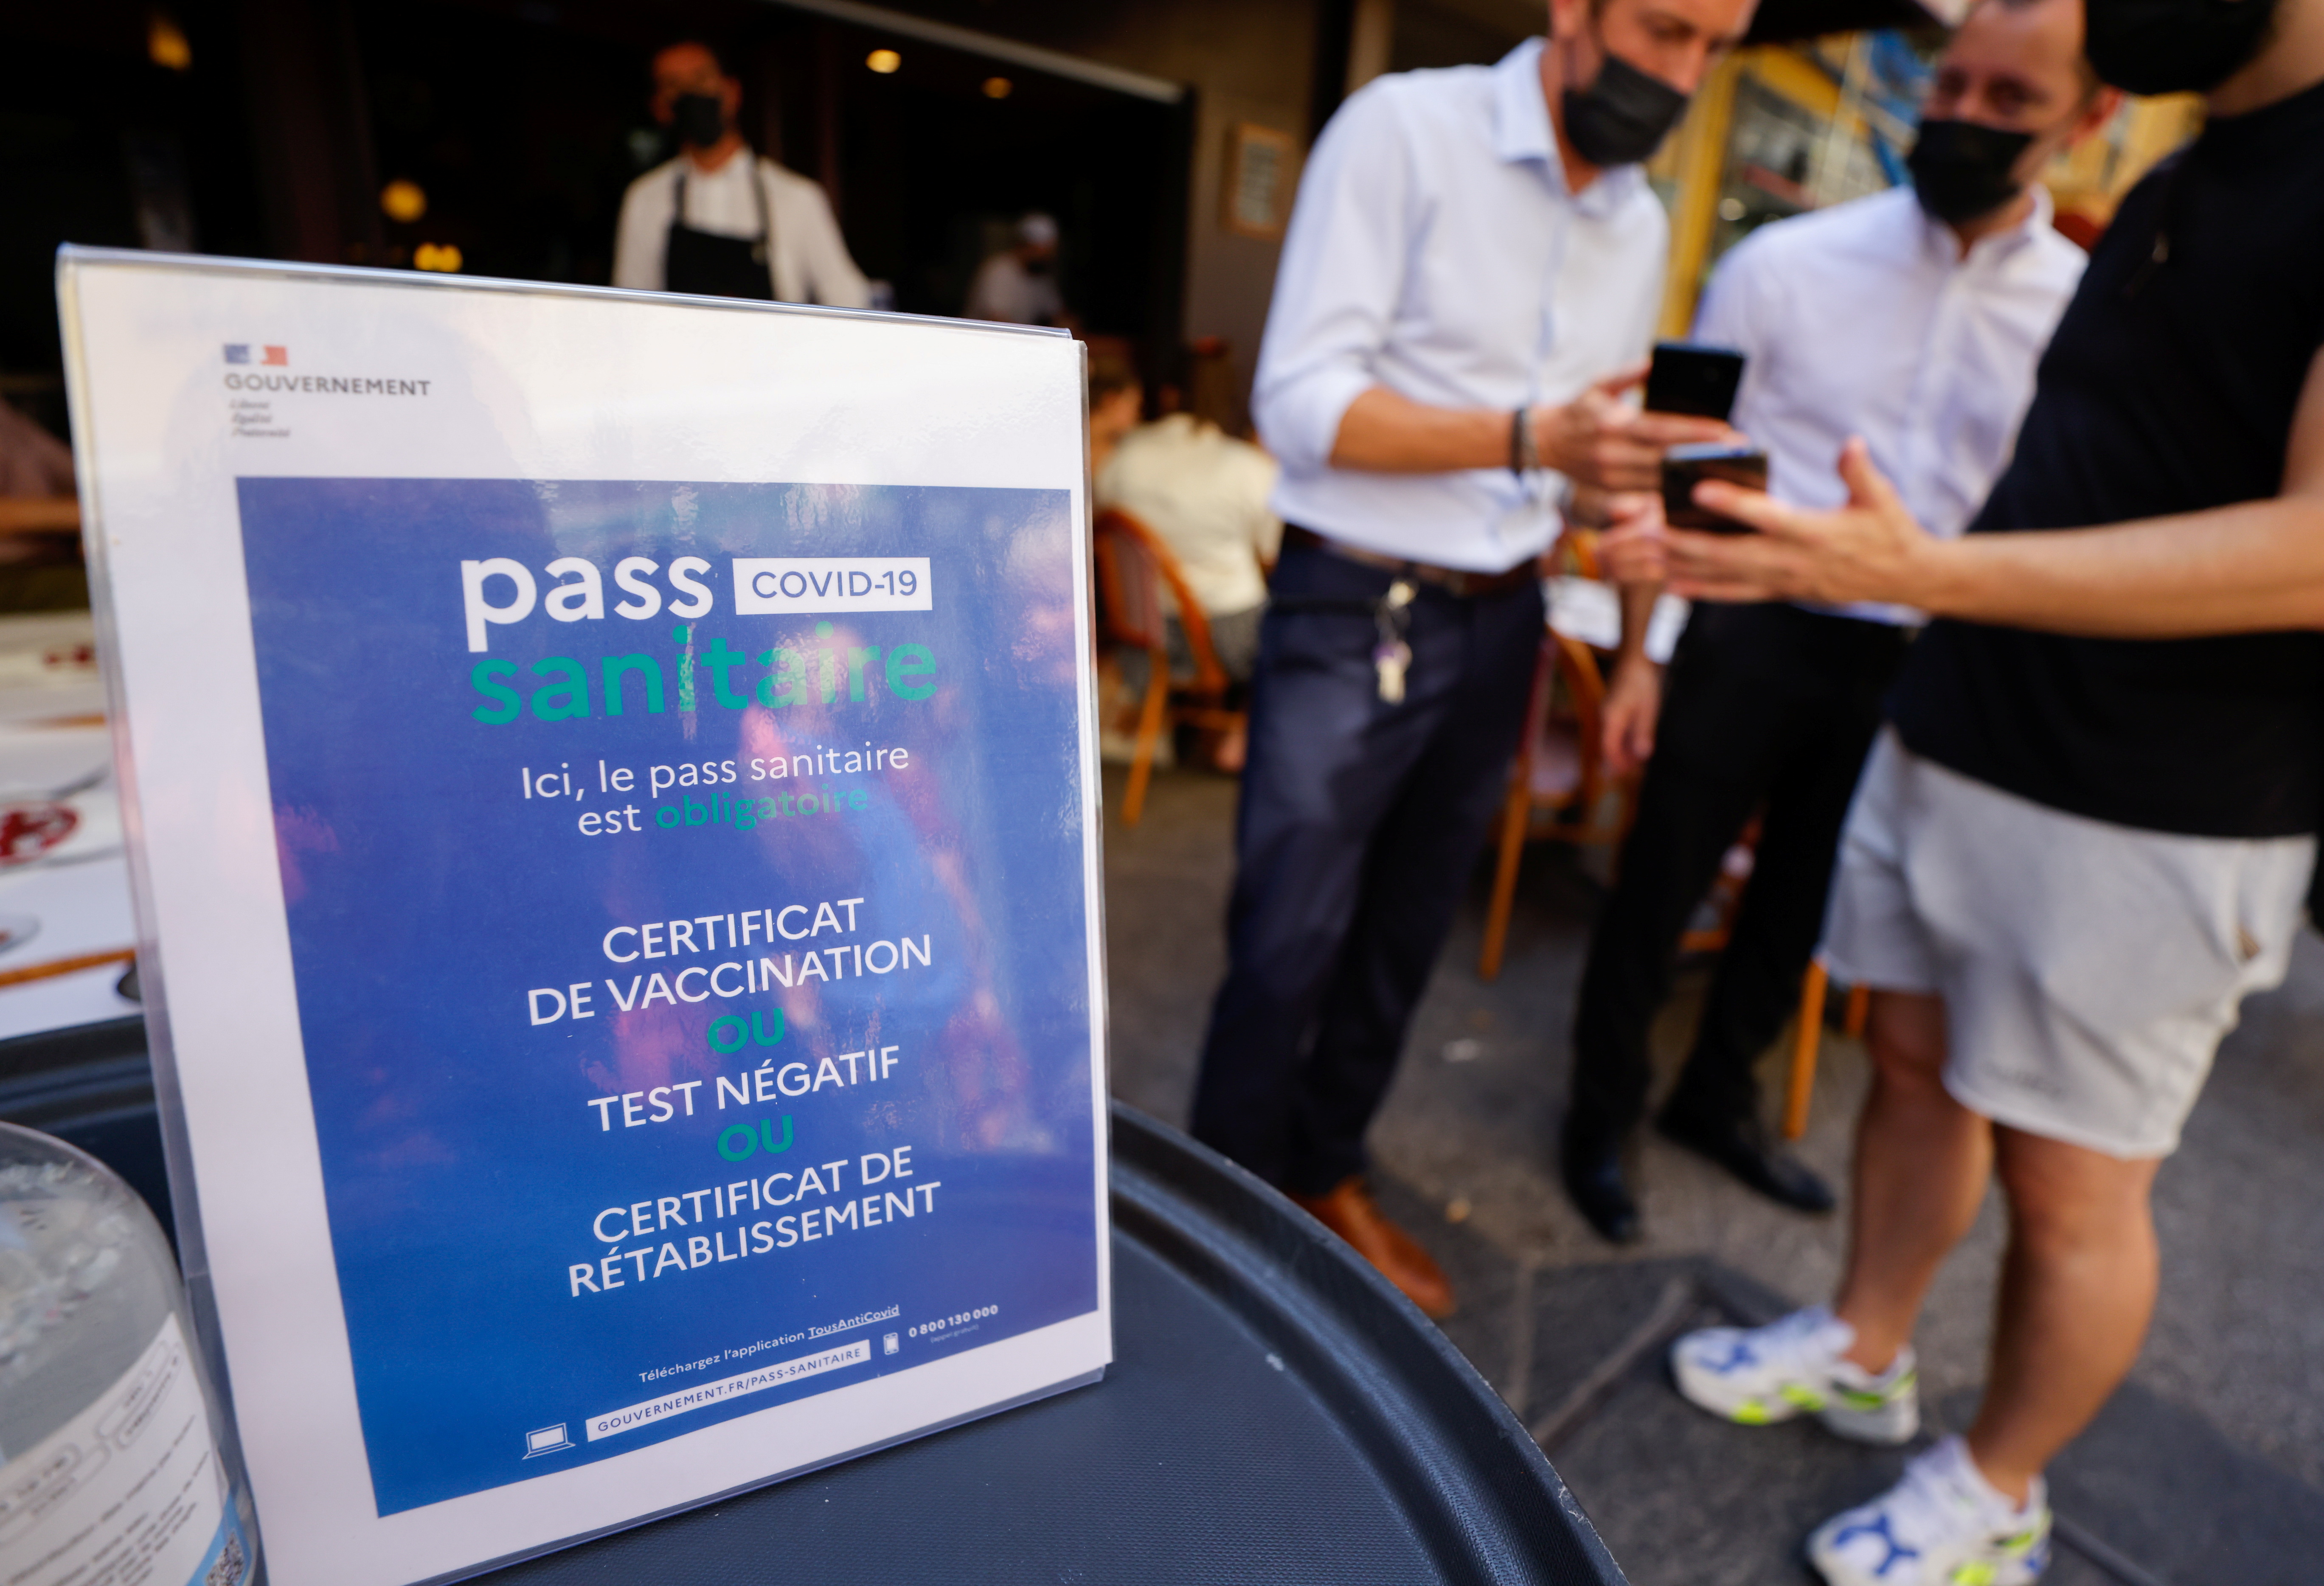 A man shows his COVID-19 health pass at a restaurant as France brings on tougher restrictions where a proof of immunity will now be required to access most public spaces and to travel by inter-city train, in Nice, France, August 9, 2021. REUTERS/Eric Gaillard